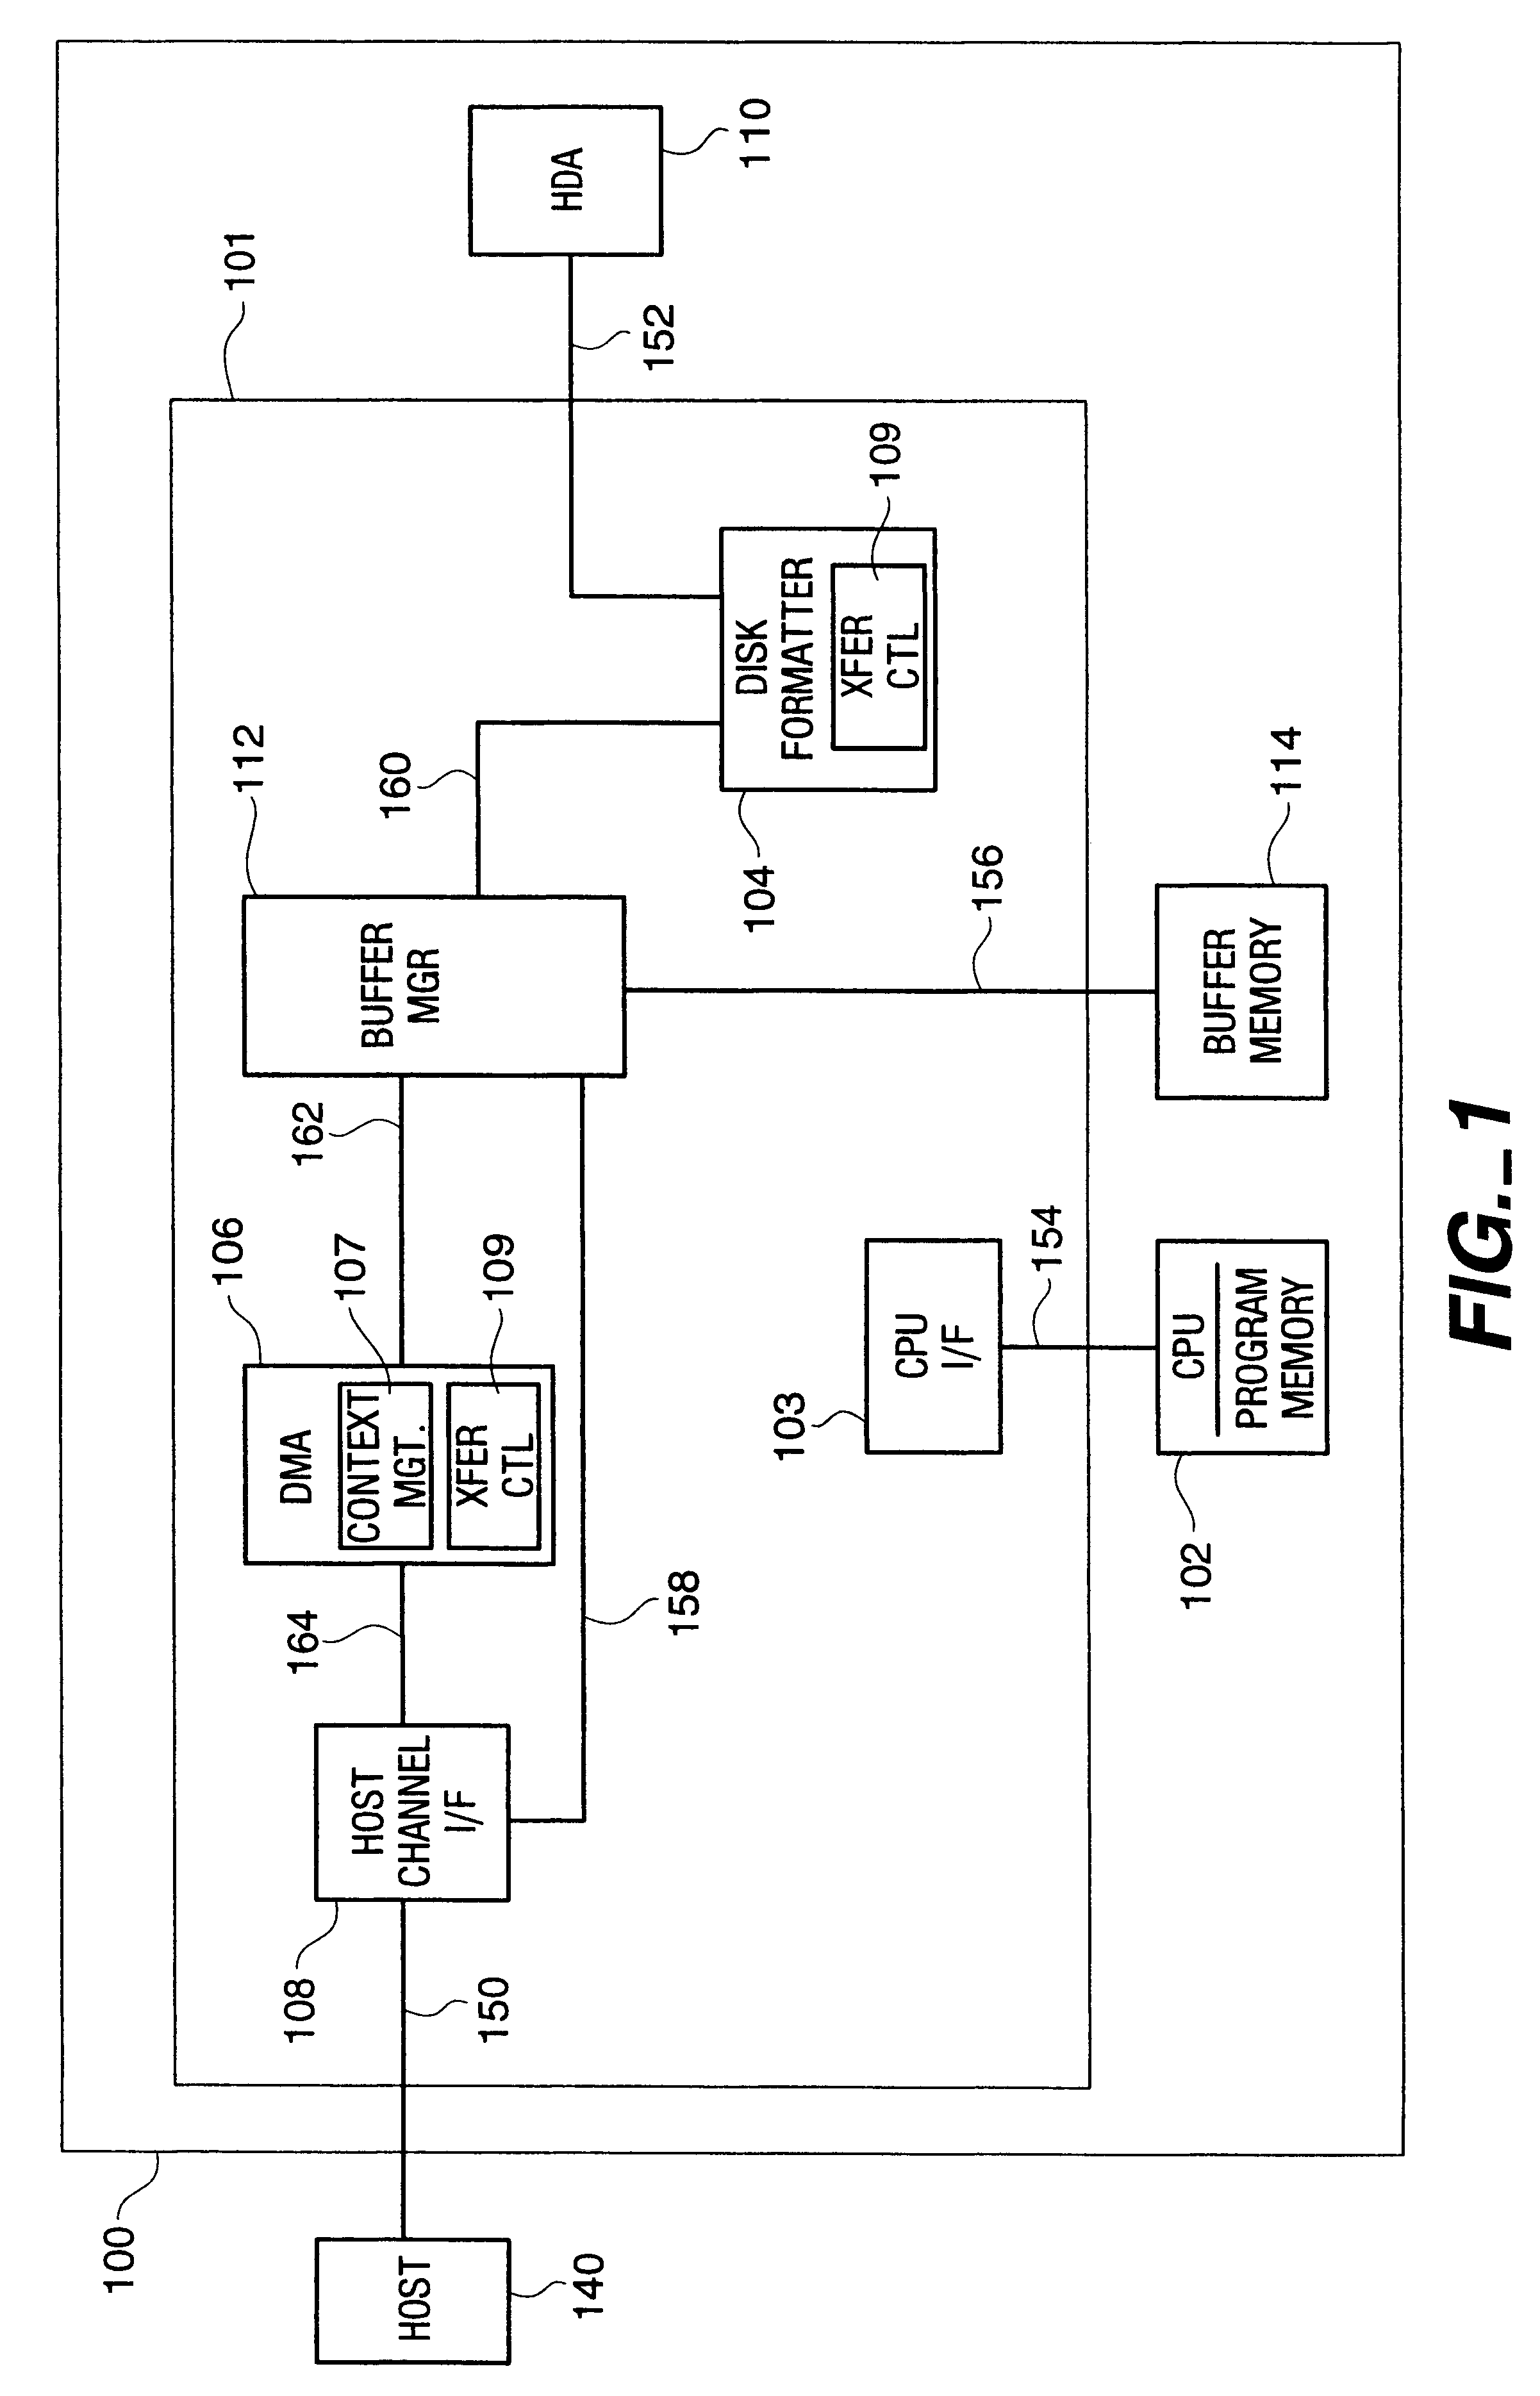 Method and structure for automated switching between multiple contexts in a storage subsystem target device